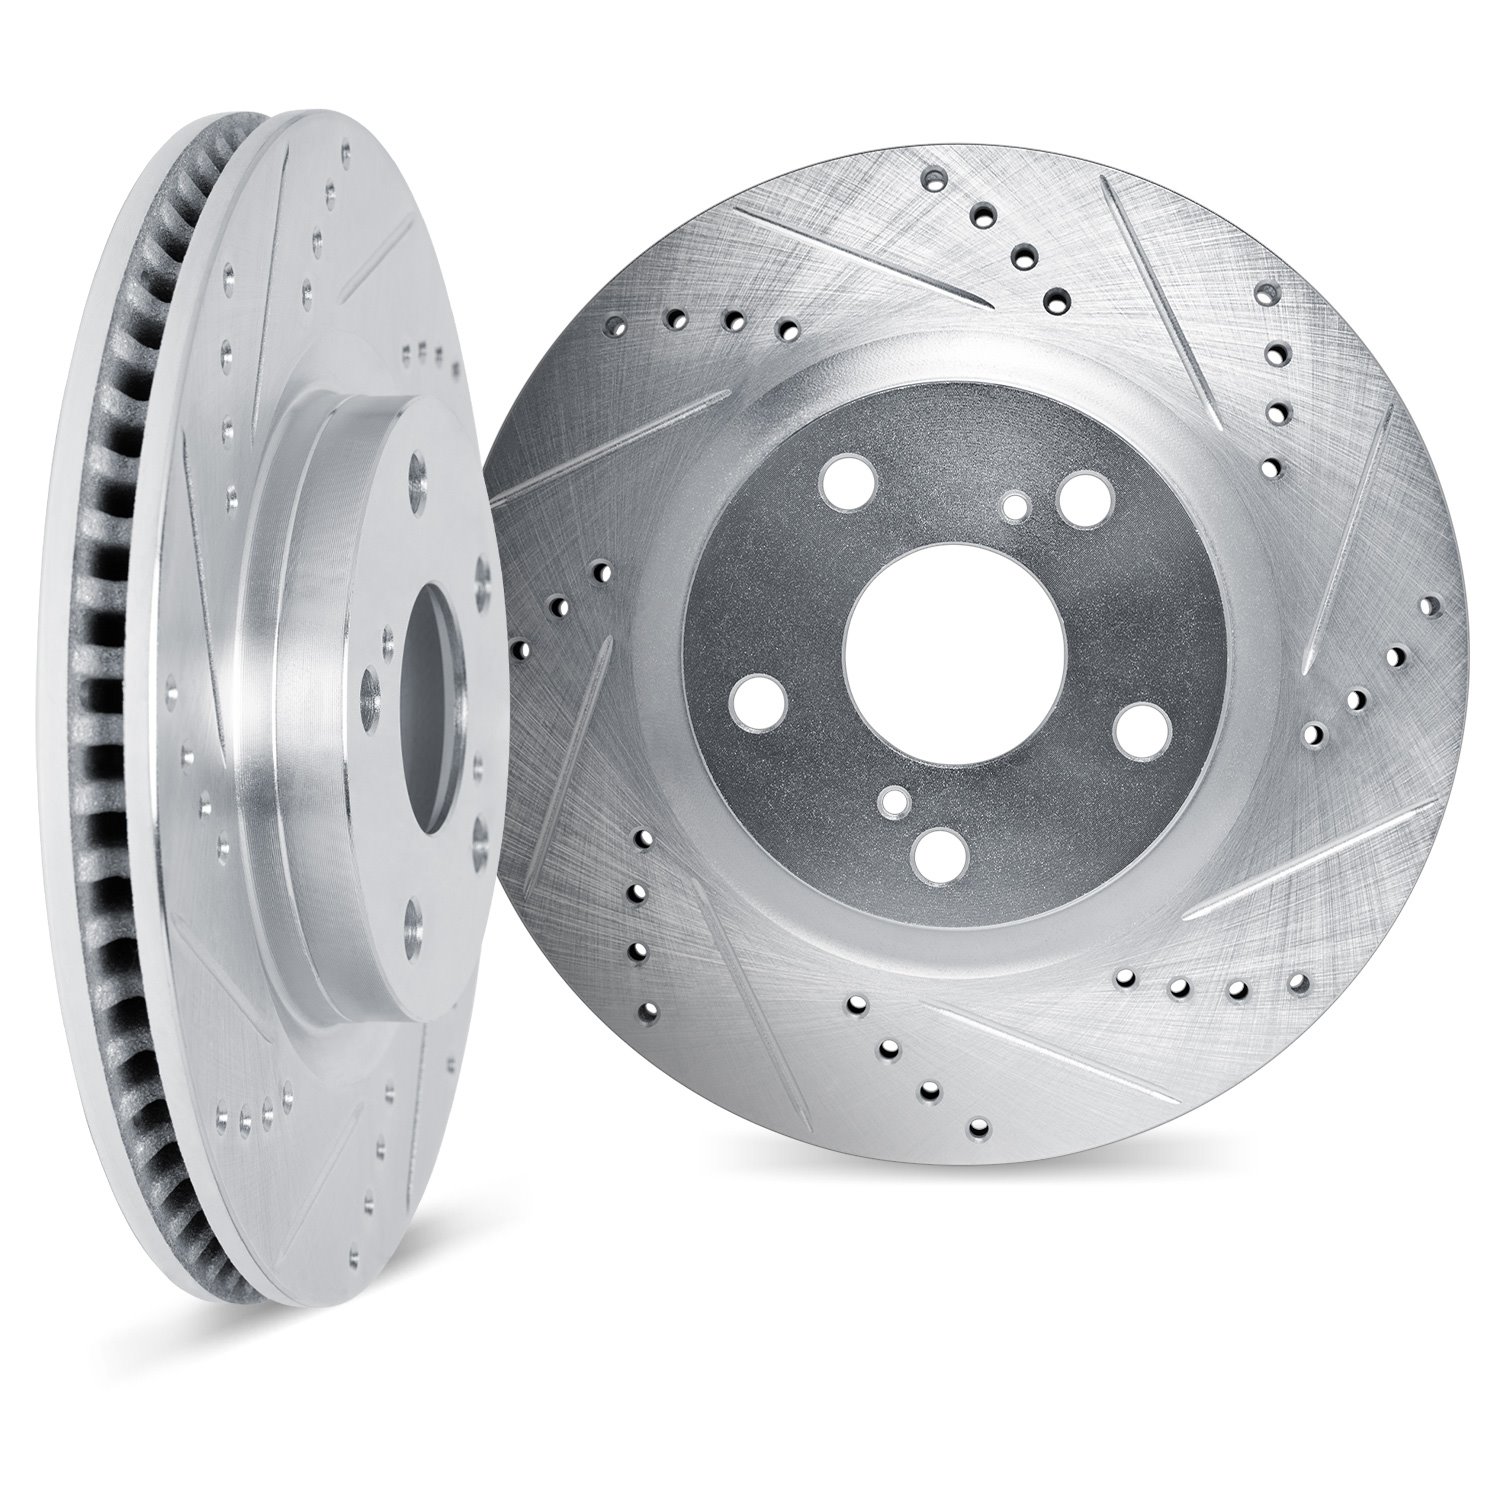 7002-31047 Drilled/Slotted Brake Rotors [Silver], Fits Select Multiple Makes/Models, Position: Front